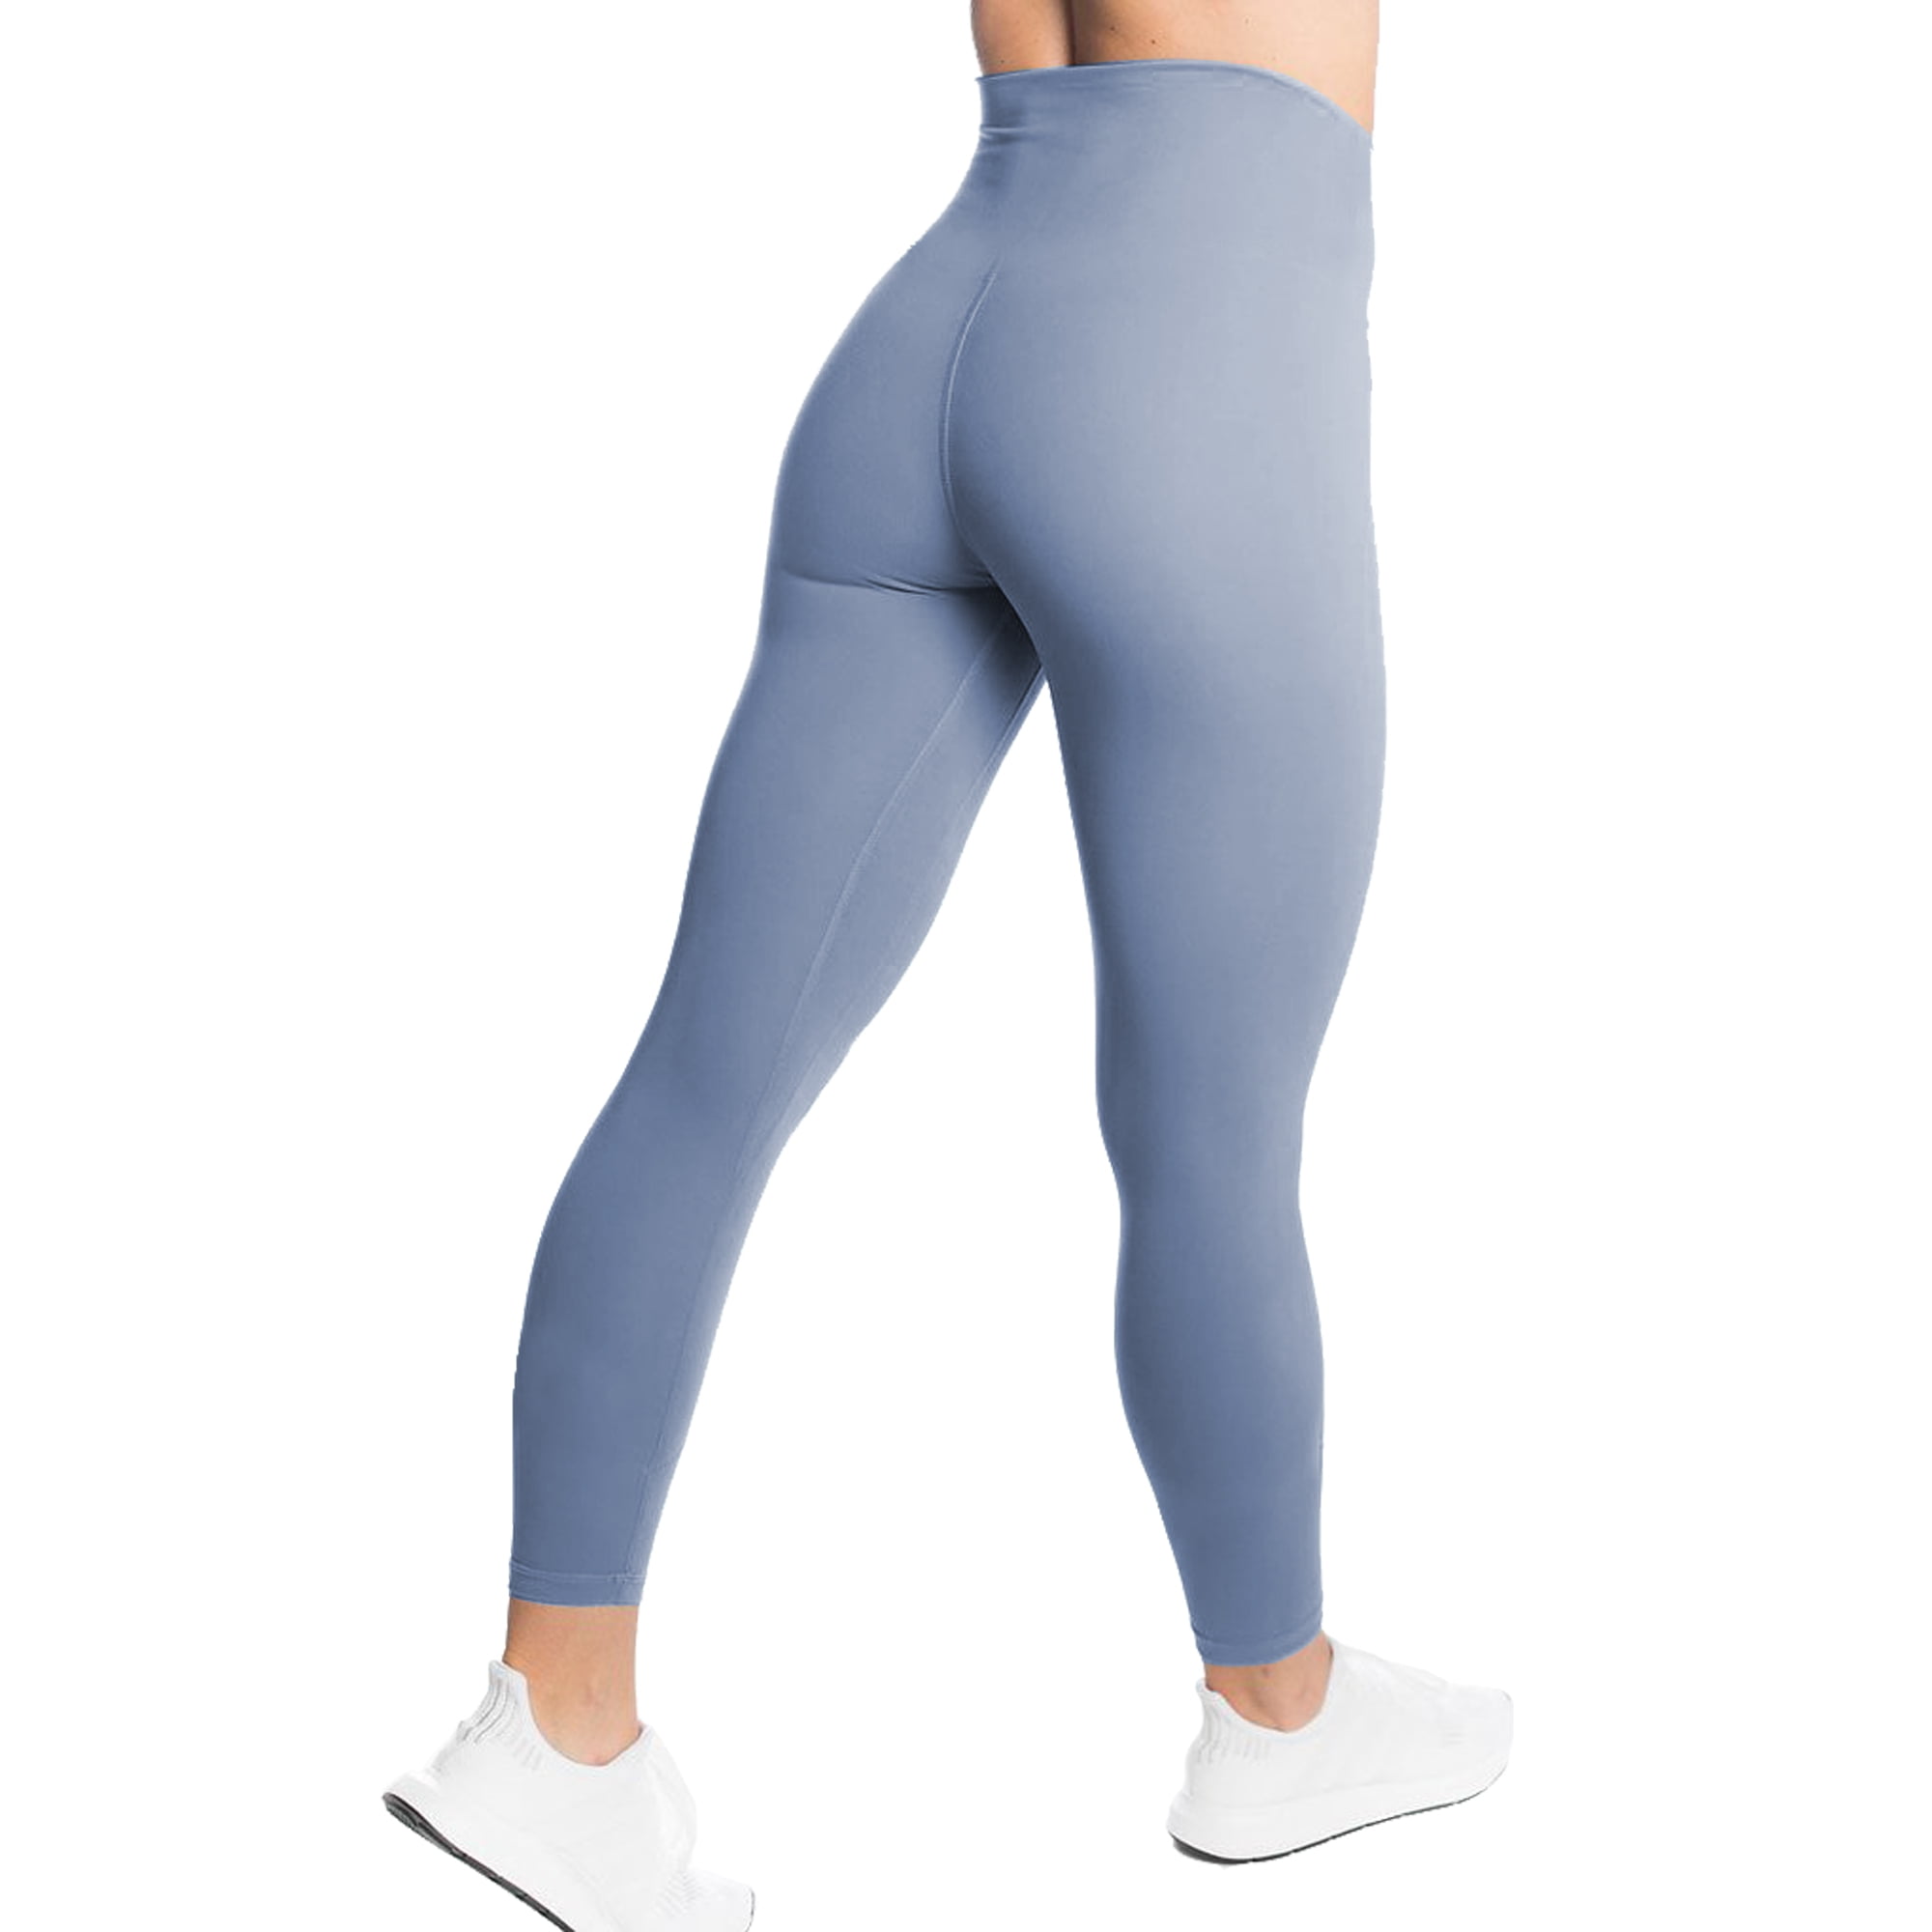 Yoga Pants Women Workout Sport High Waisted Legging Fitness Seamless Tights  Workout Activewear For Running, Gym and Kicking, Blue-L 